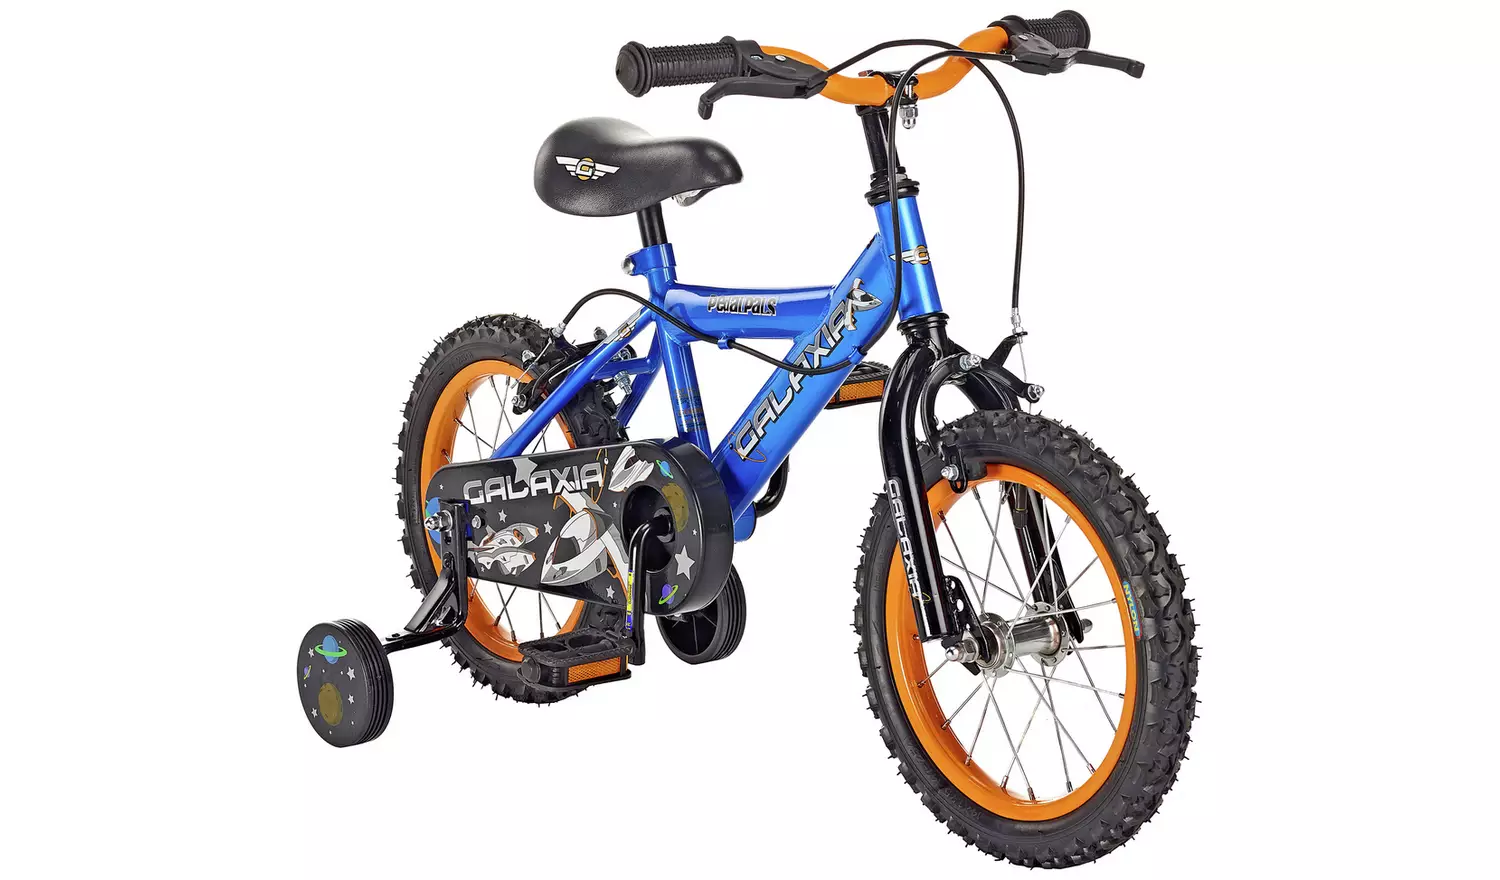 Pedal Pals Galaxia 14 inch Boys Mountain Bike Boxed – New